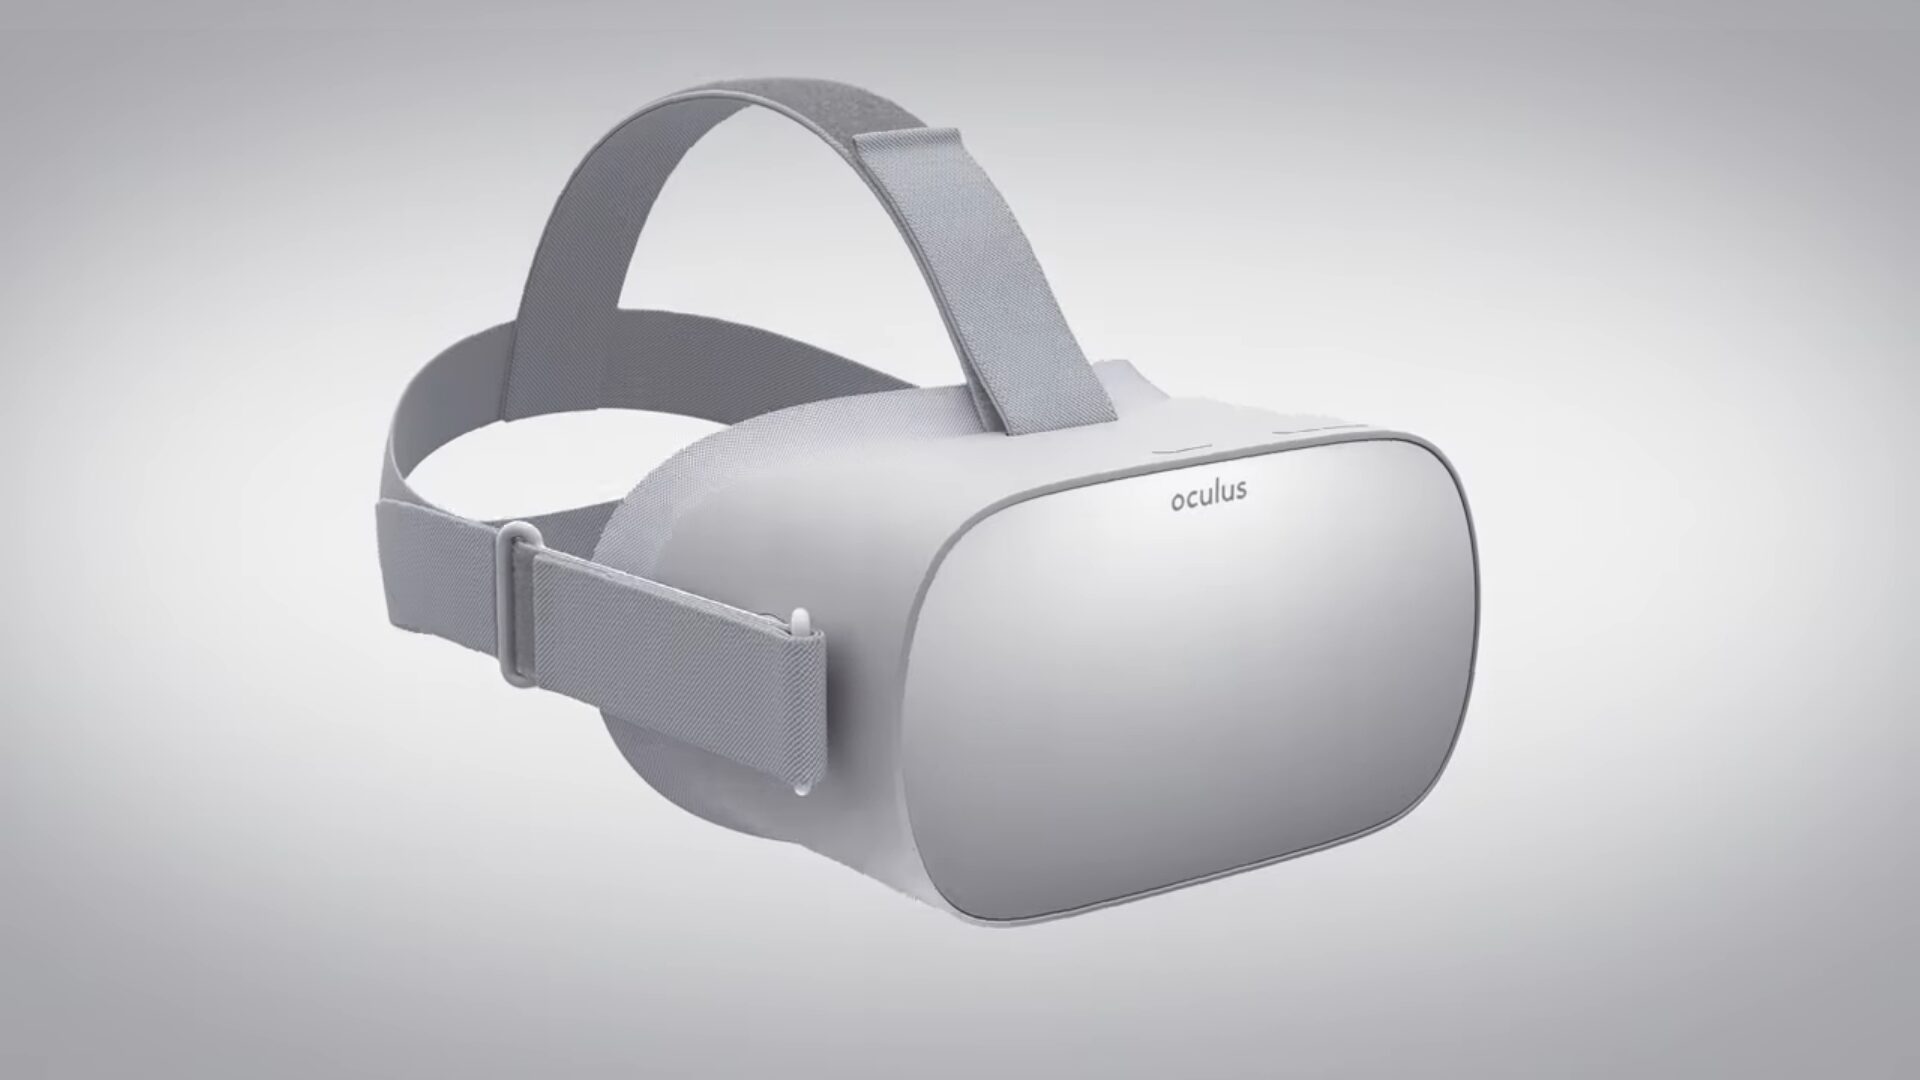 Facebook’s Oculus Go is a $200 Standalone Headset